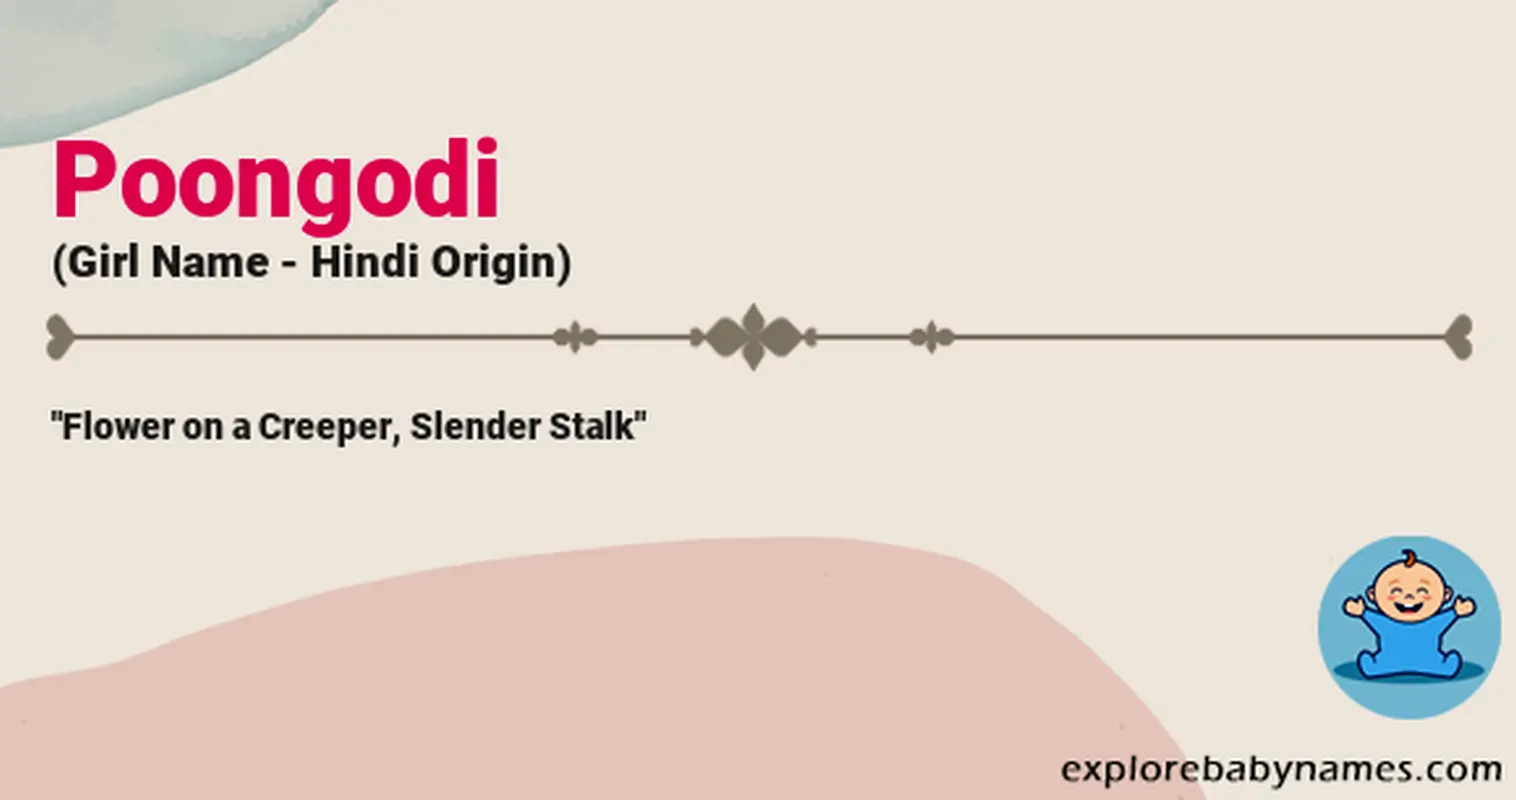 Meaning of Poongodi